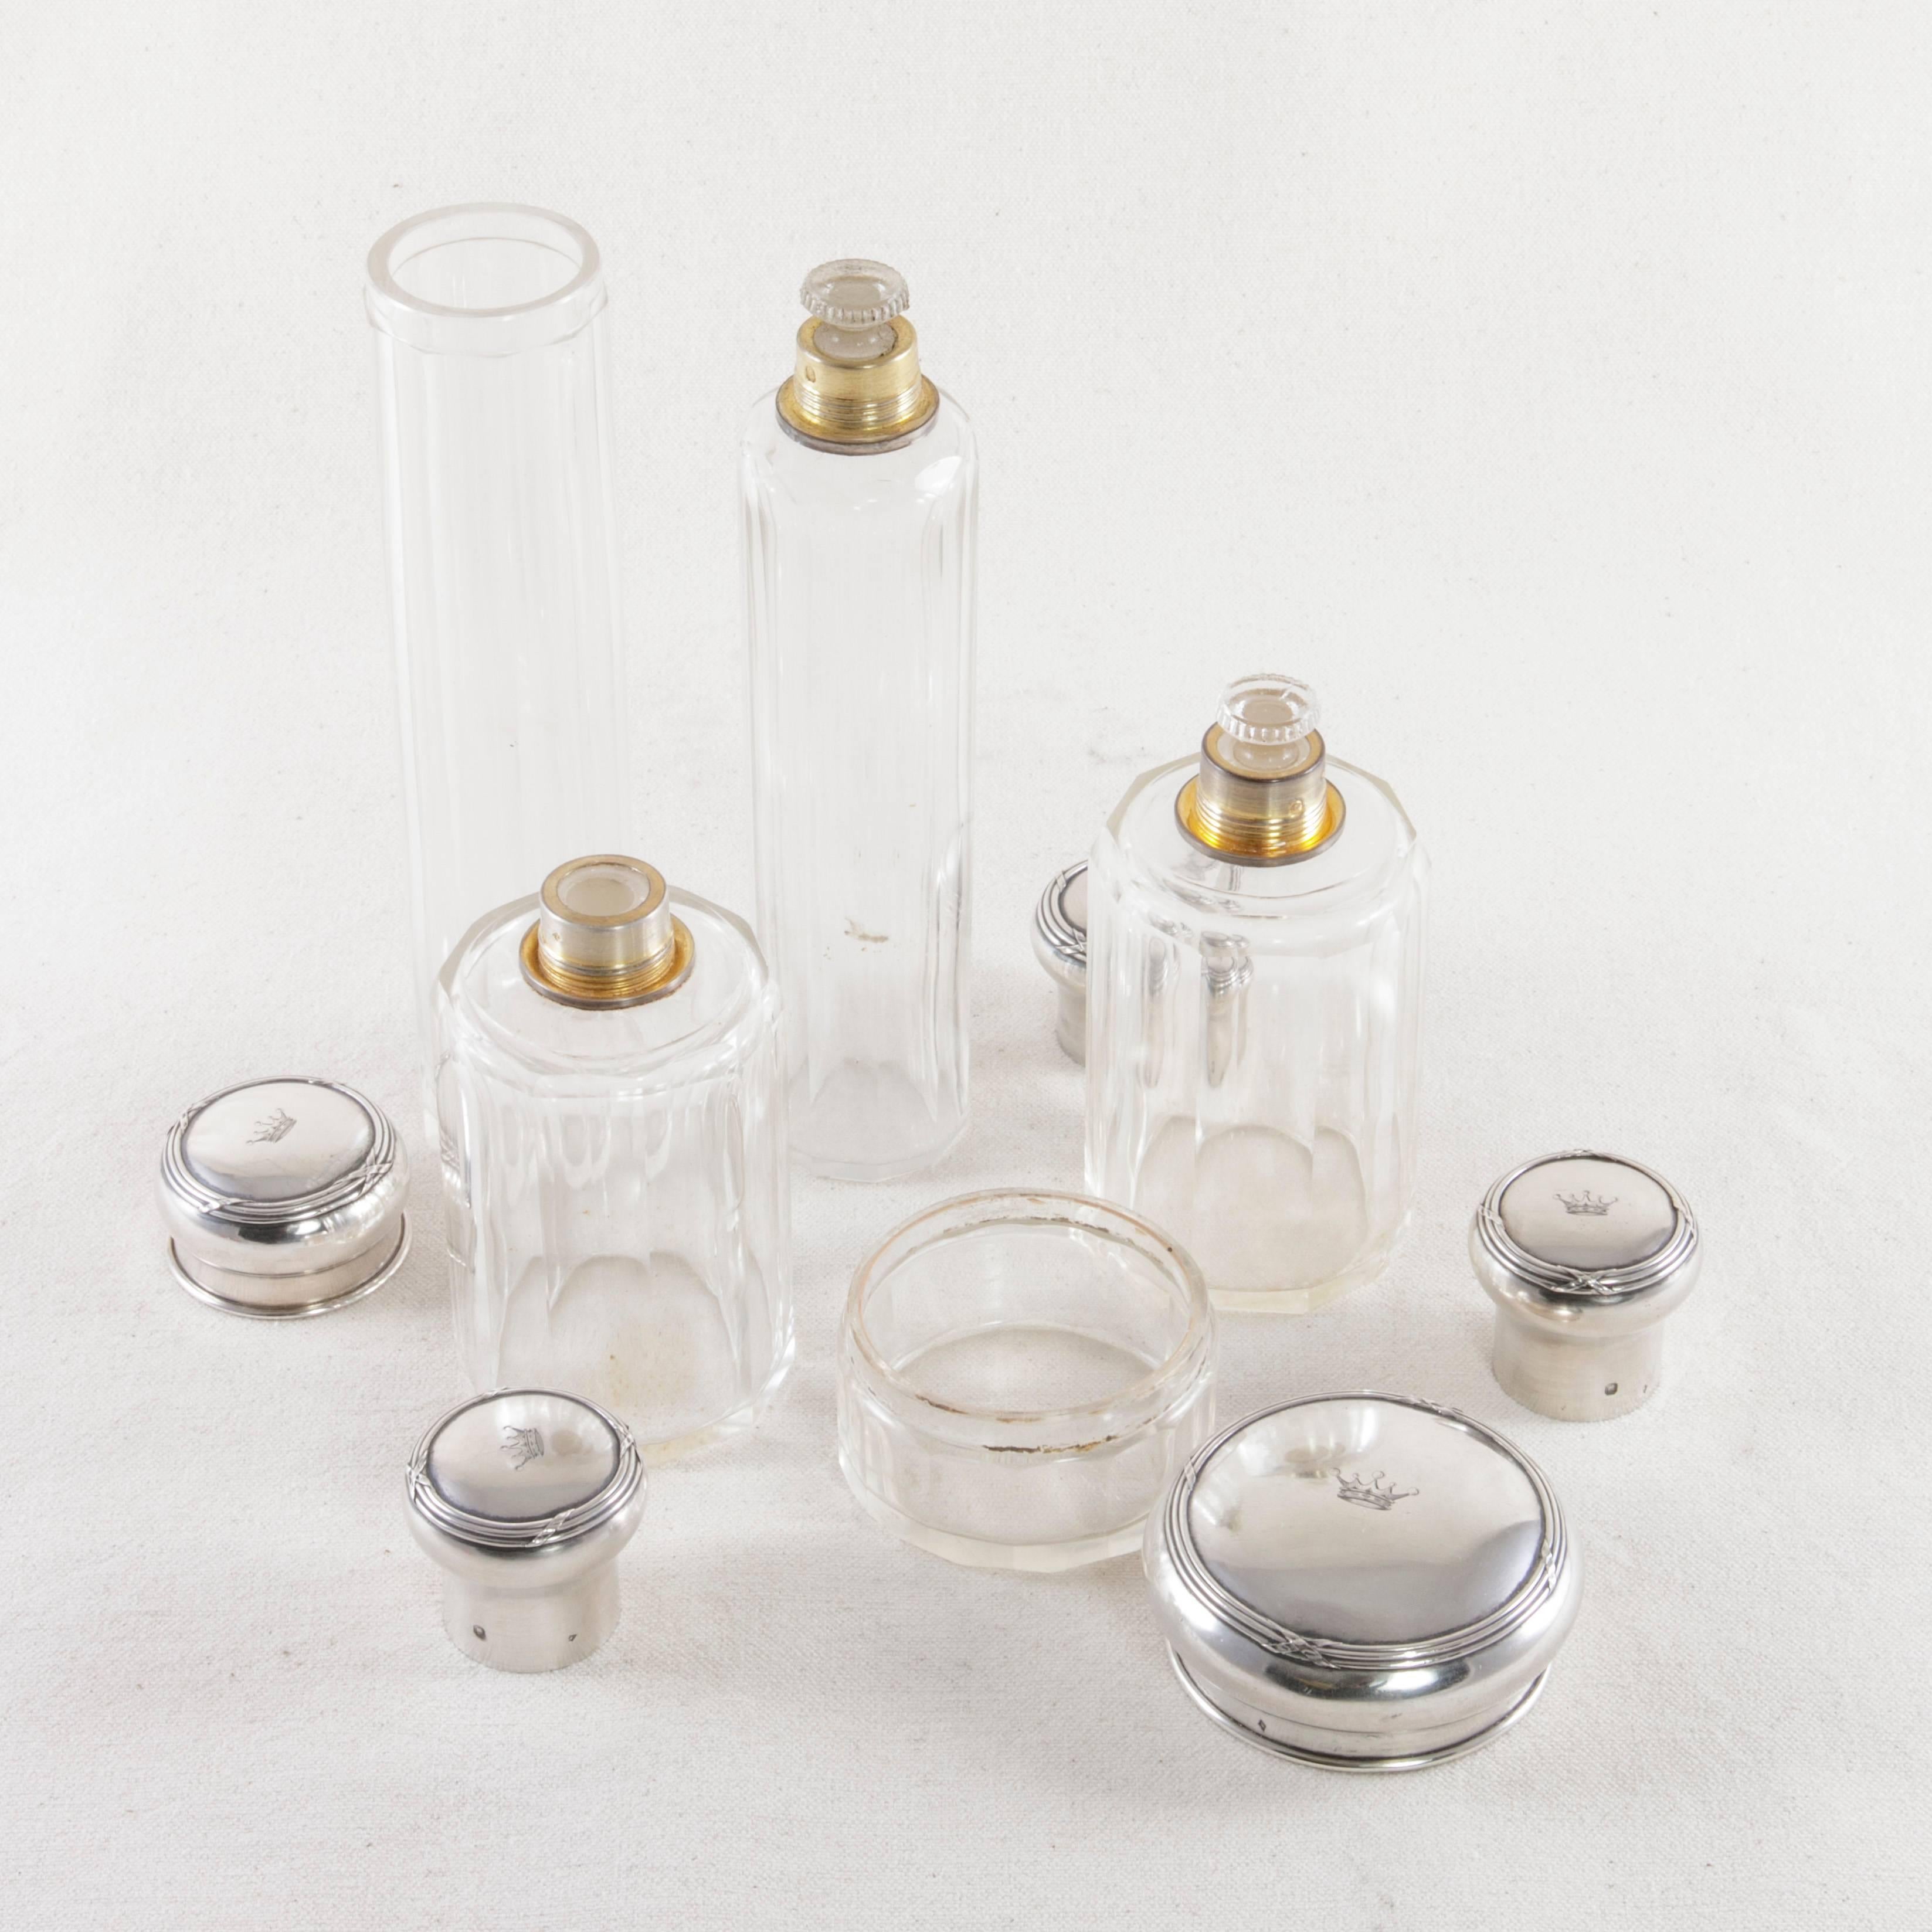 Early 20th Century Set of Five Crystal Vanity Bottles, Engraved Sterling Silver Lids, circa 1900